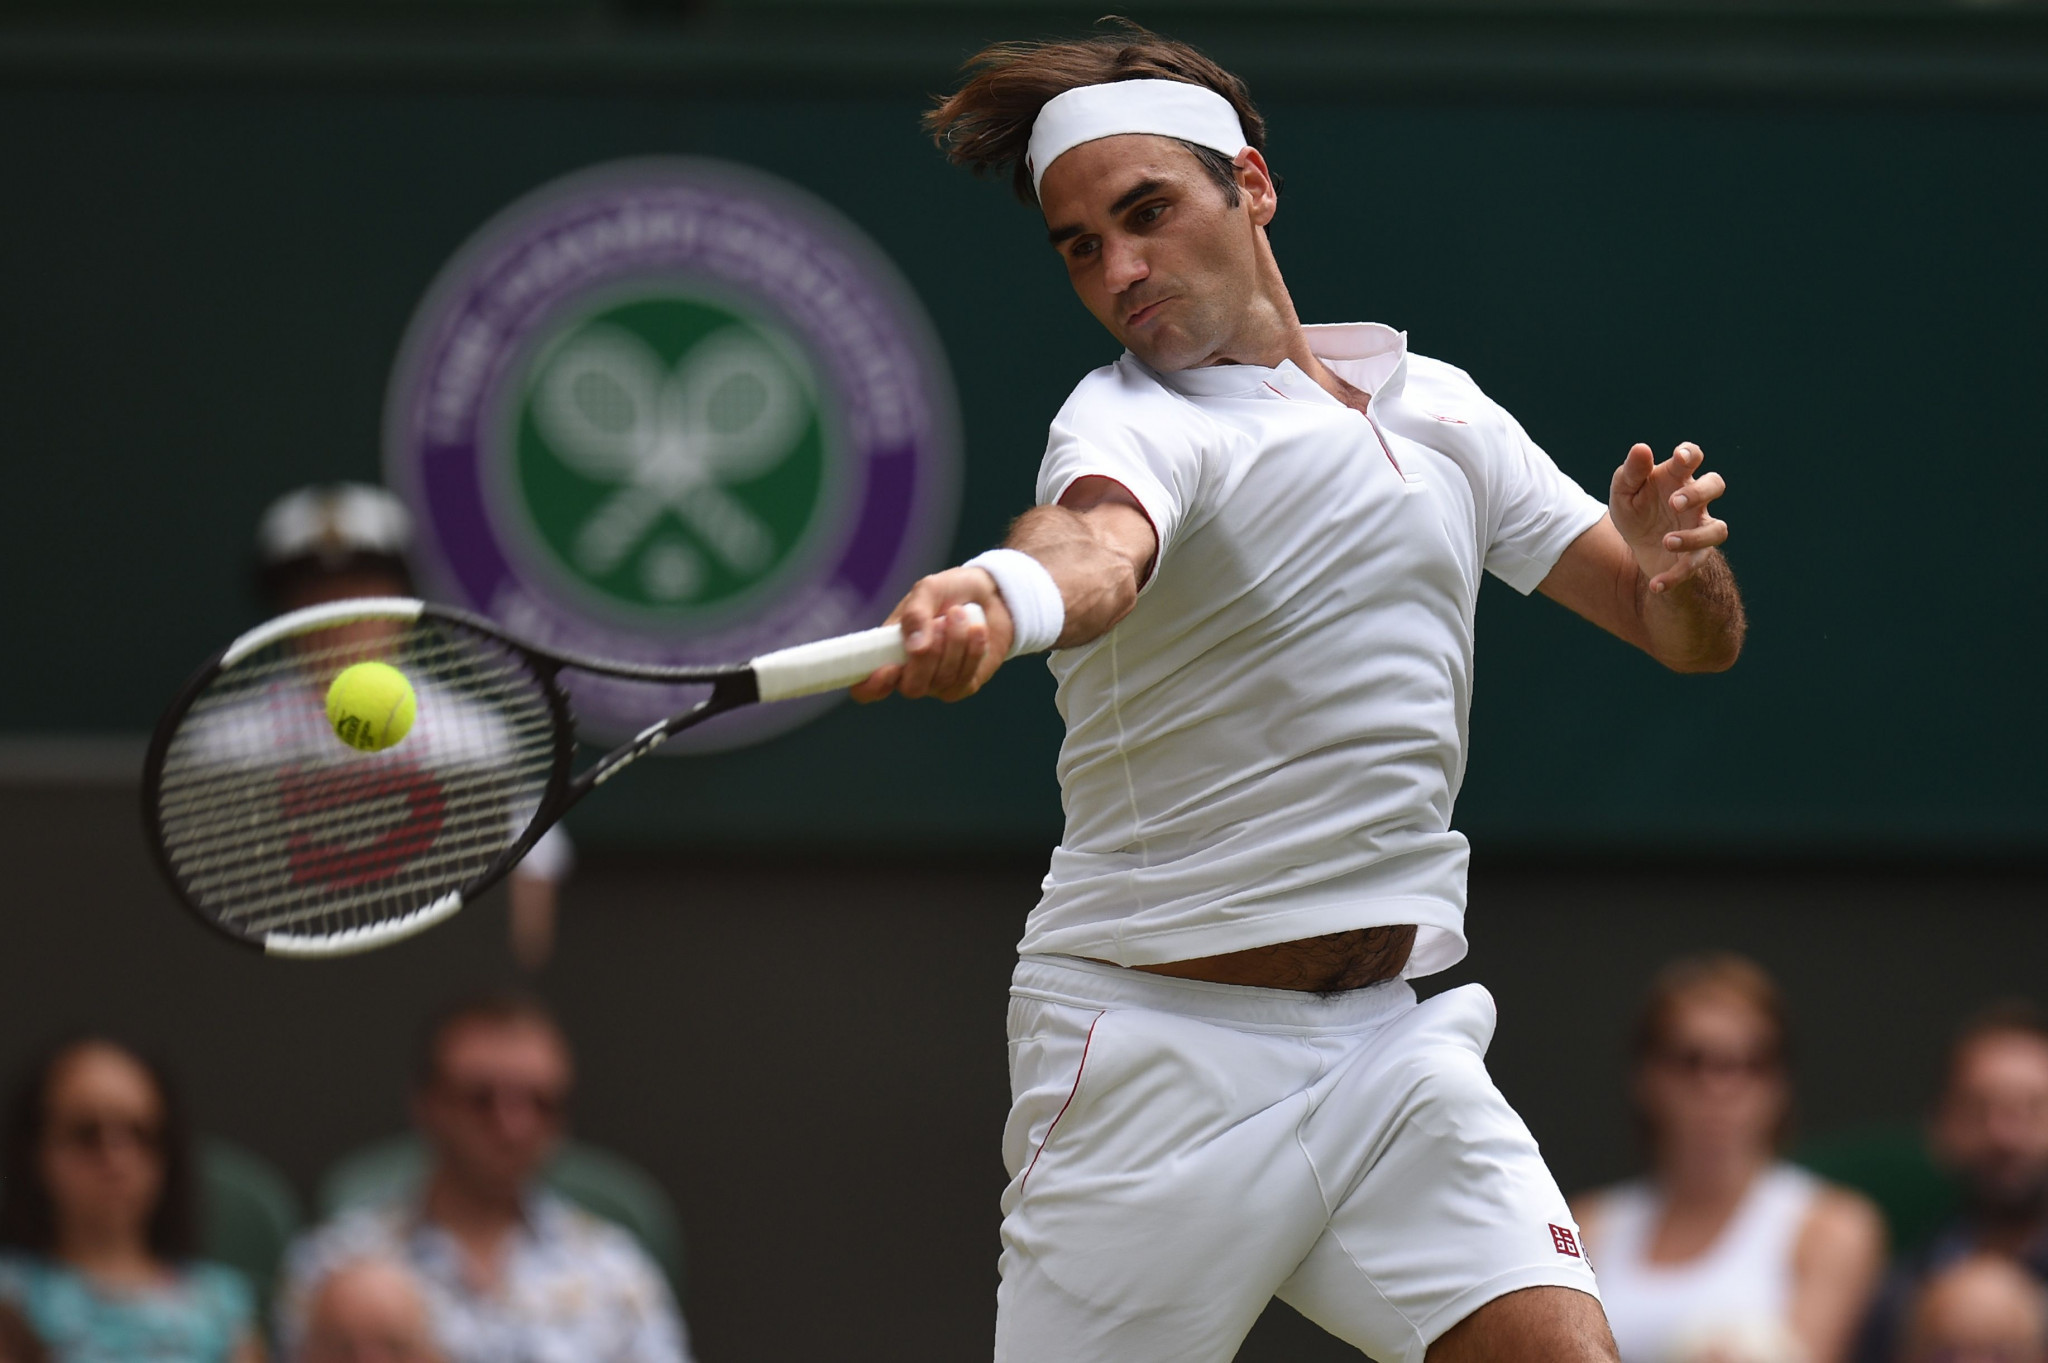 Roger Federer roared into the next round at Wimbledon ©Getty Images